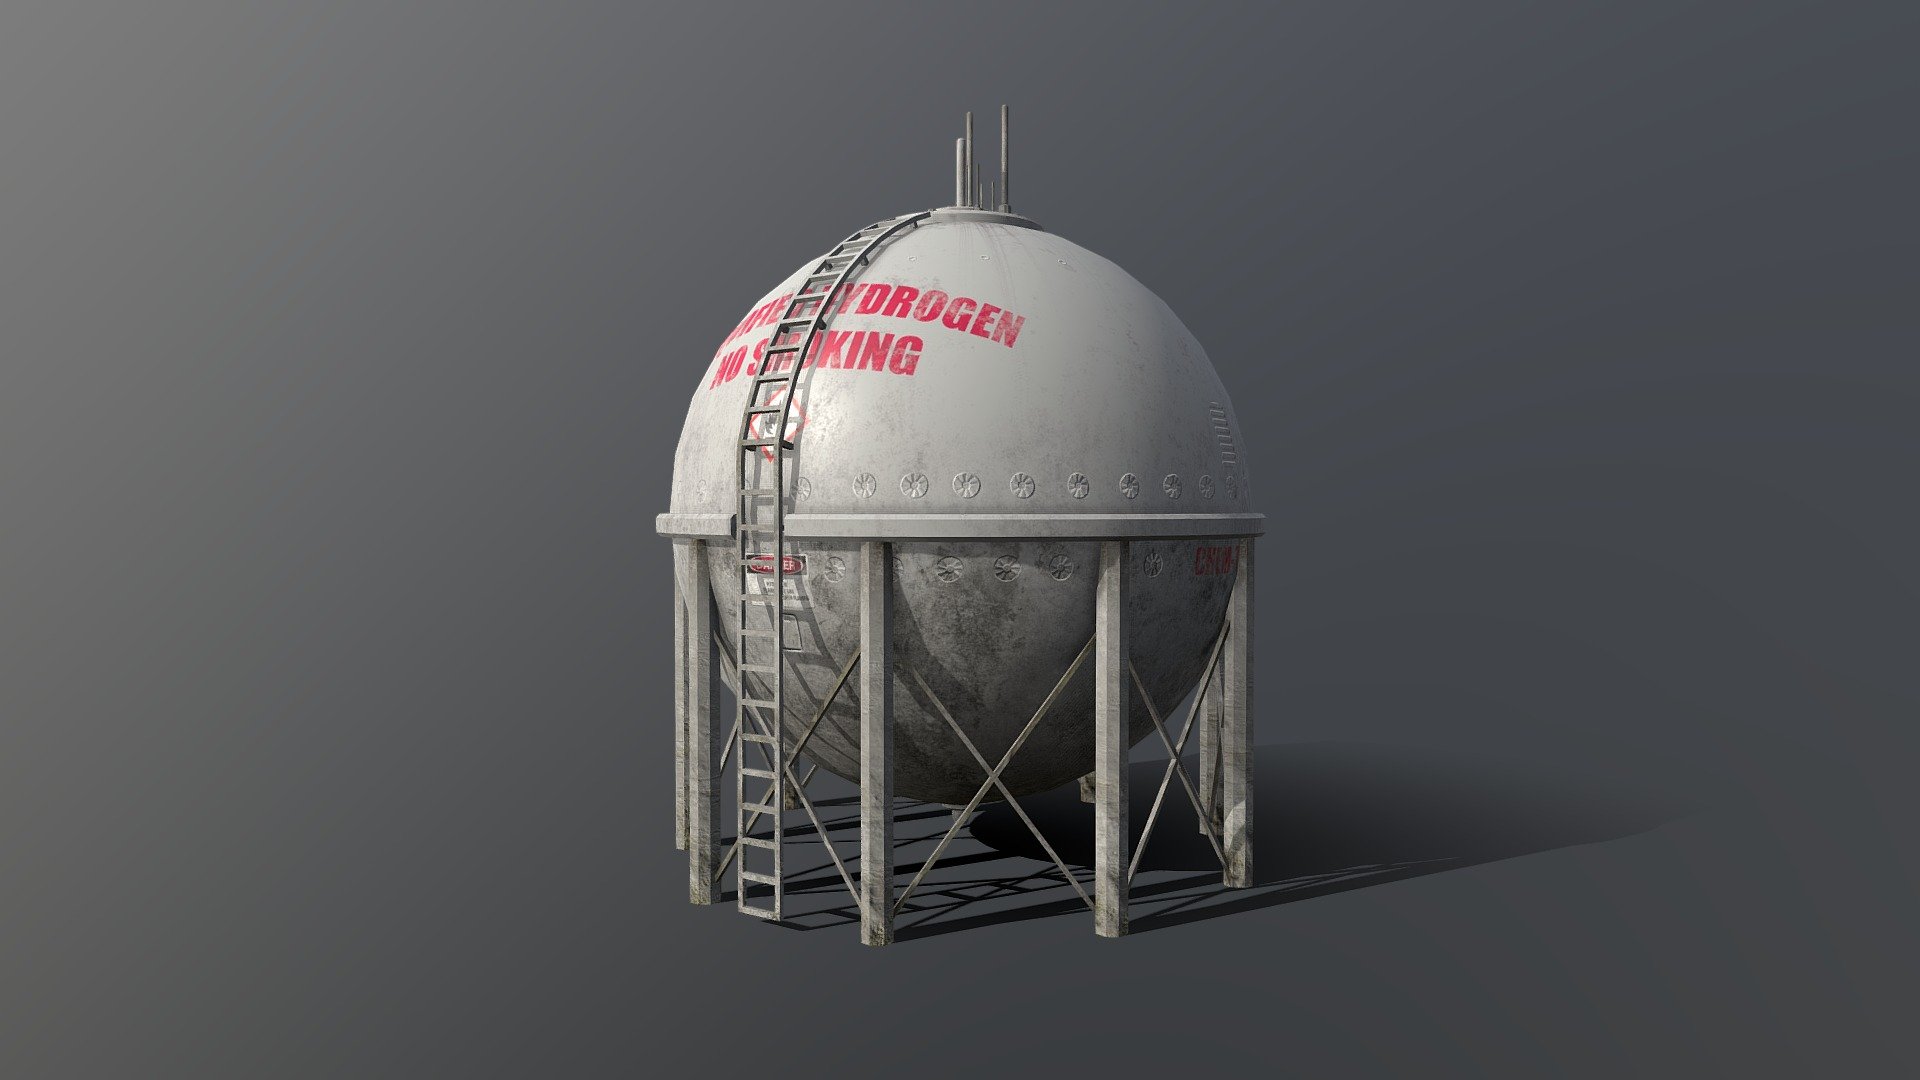 Liquid Hydrogen Spherical Industrial Storage Tank

Created in Blender 2.79/2.80

Textured in Substance Painter 2

2K Resolution

BaseColor, Metallic, Roughness, Normal Maps + Height Map if you wish to use that also

Low Poly Model

Tested in 2.80 with the EEVEE Render engine

Nice Asset for your project

Detailed Model

Easily duplicate this Model for a rack of tanks to fill out your scene

Please note if you are using EEVEE:

You may need to go into the Render Properties Tab - Performance - Enable High Quality Normals

Approximate Real World Scale Applied

3 Formats provided:  .blend , Fbx , Obj  + All Textures

Thanks for your interest &amp; support!

MagicCGIStudios - Liquid Hydrogen Spherical Storage Tank - Buy Royalty Free 3D model by MagicCGIStudios 3d model